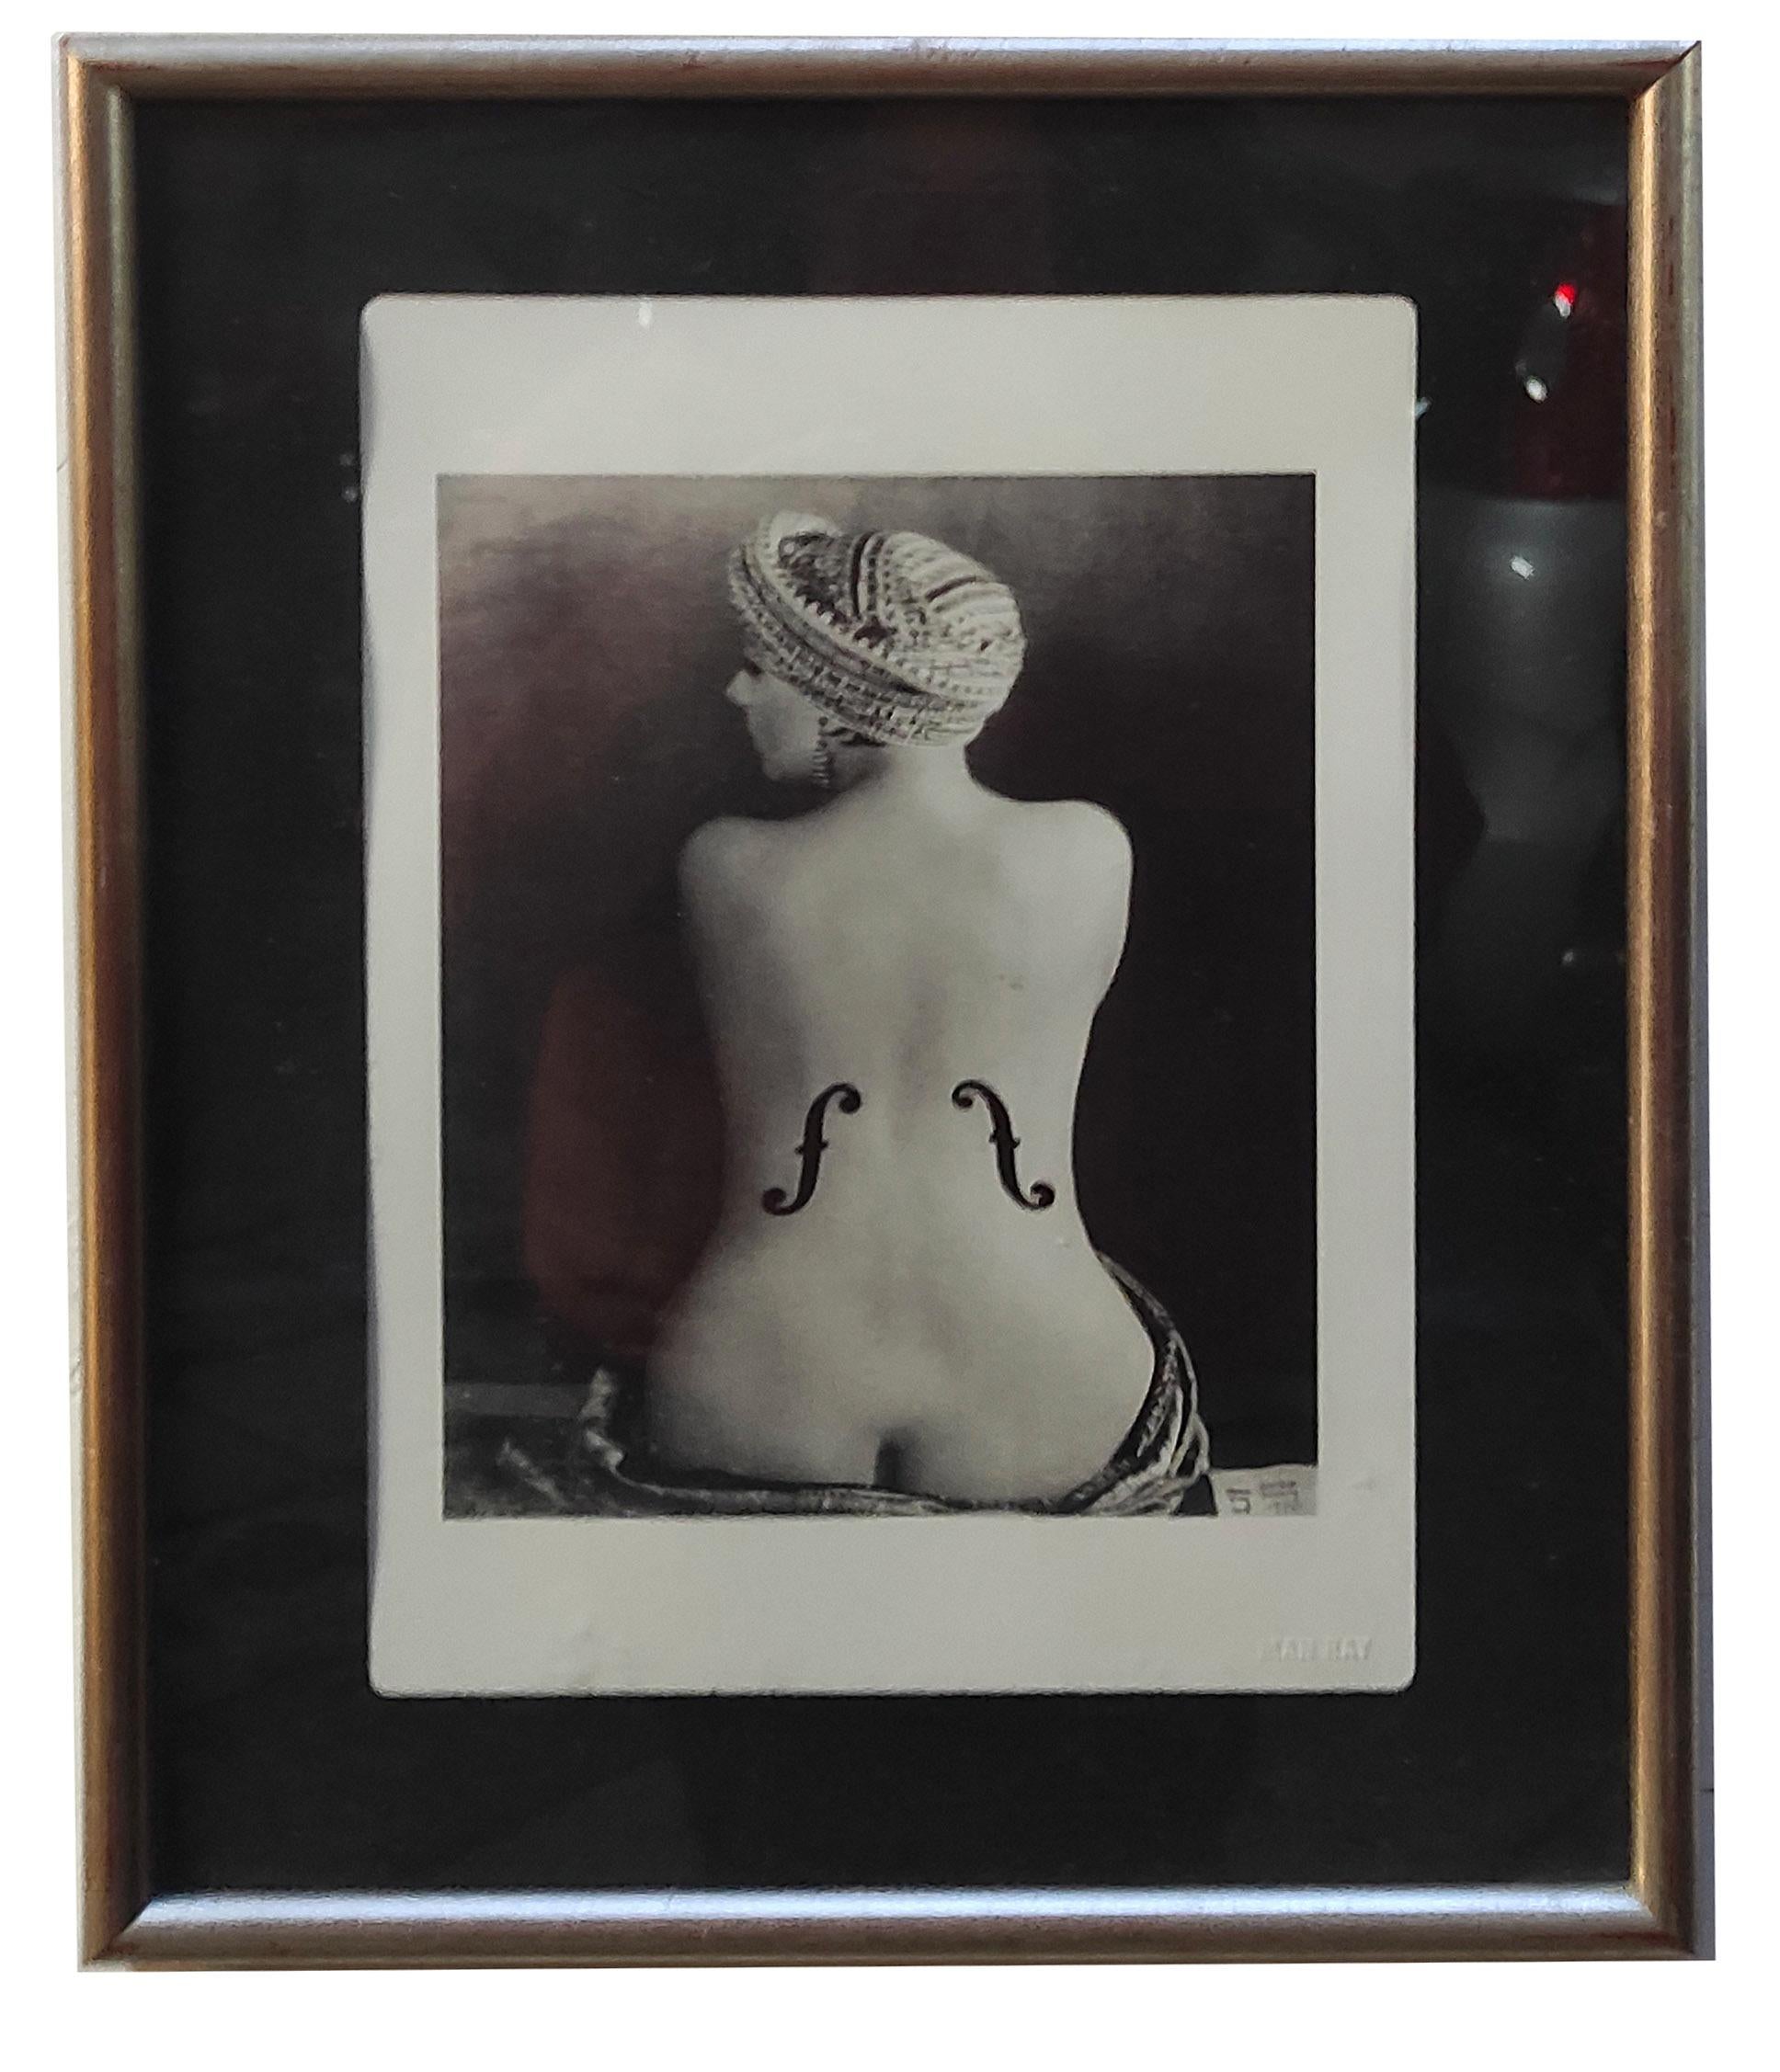 Man Ray "Le violon d'Ingres" - Limited edition photolithograph, 42x30 cm
Embossed signature at lower right
2006 Magnum Photos Edition
With elegant black passepartout
Made in 1924 and now at the Musée National d'Art Moderne in Paris, the work is the